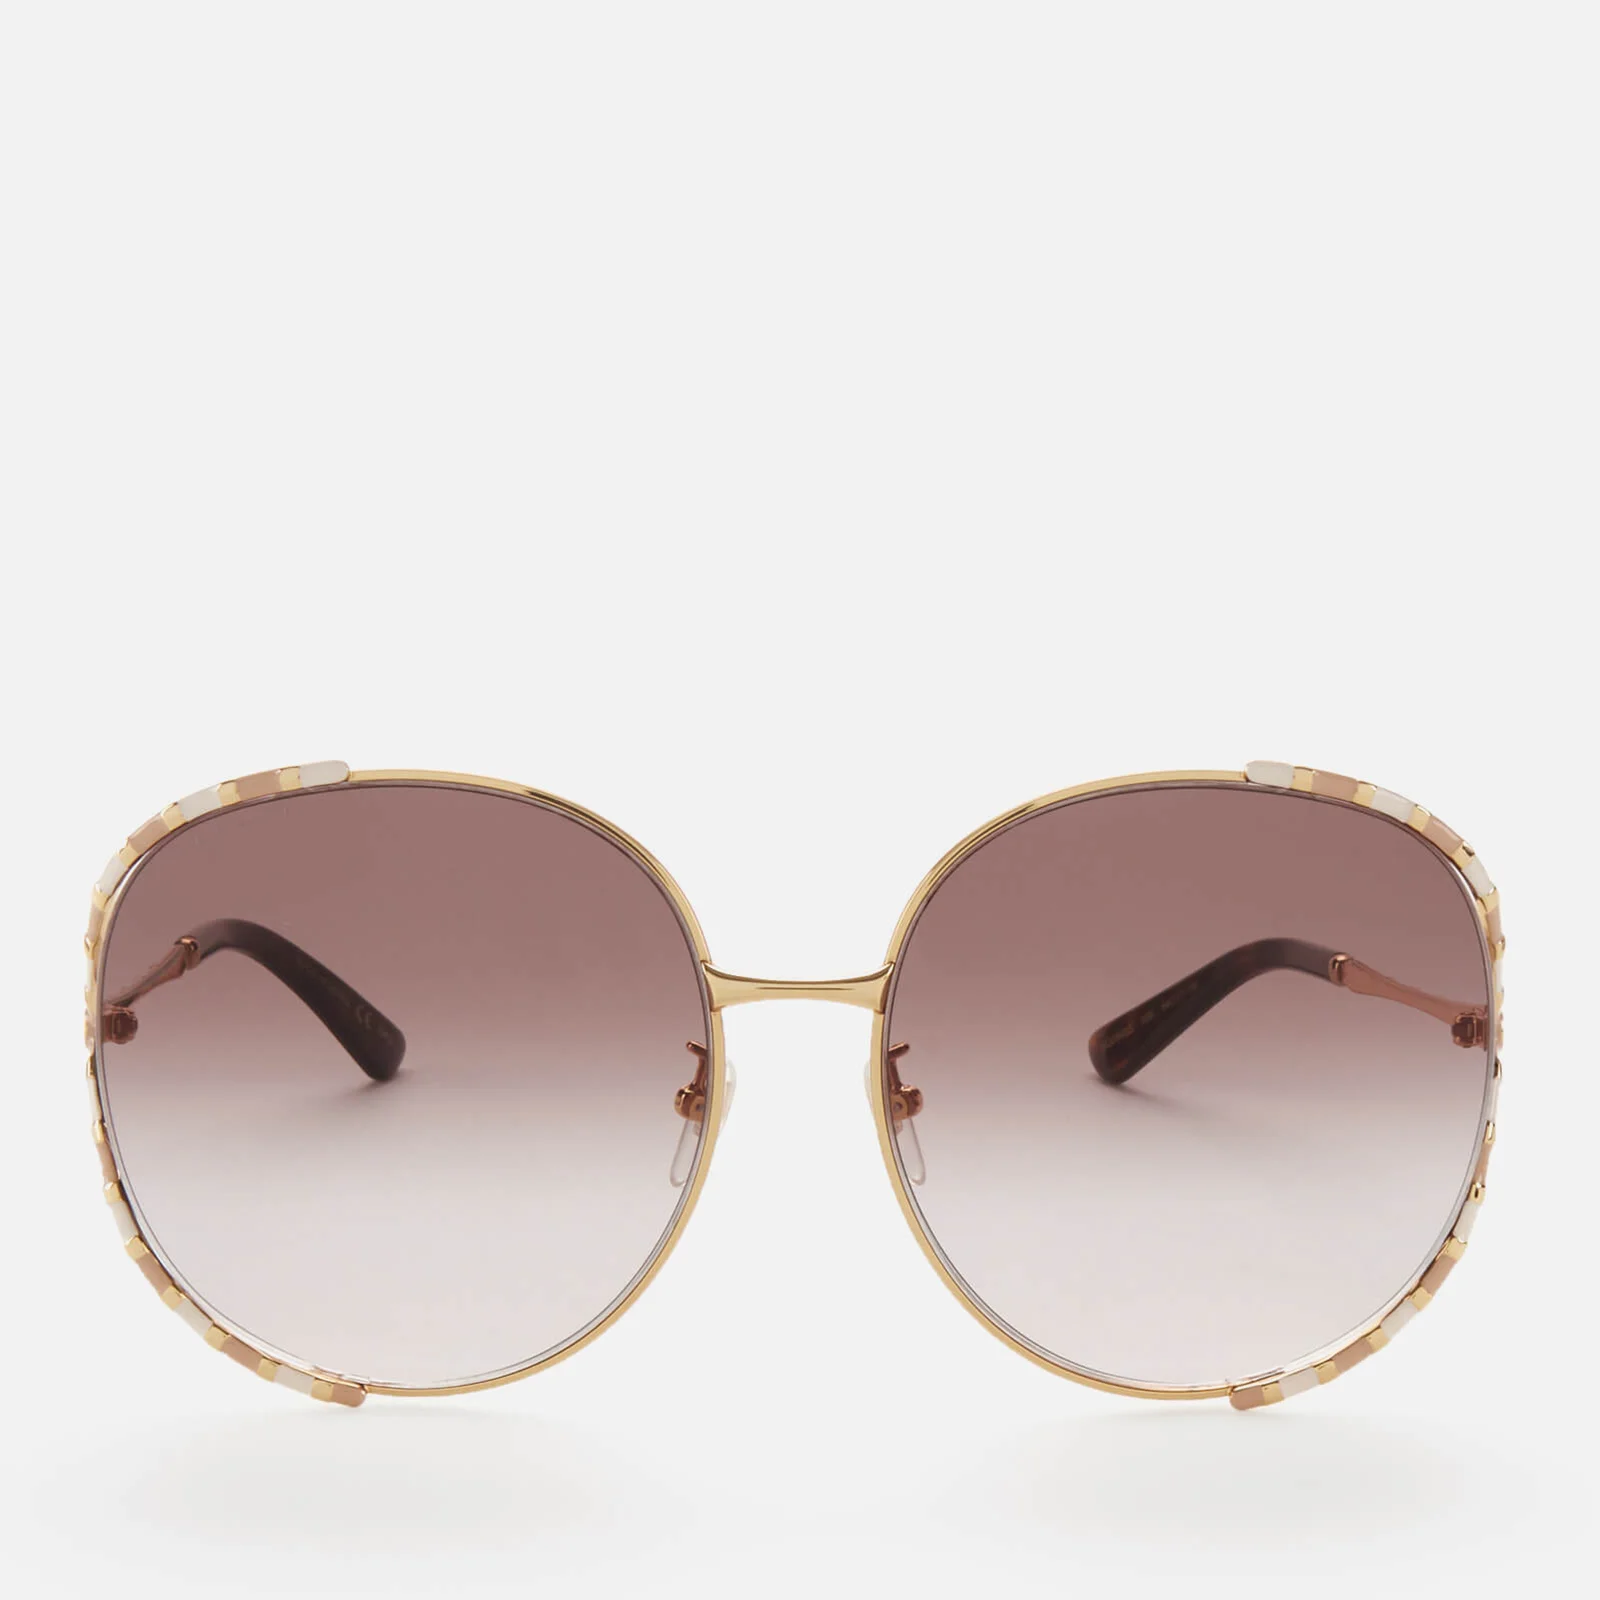 Gucci Women's Oversizsed Metal Frame Sunglasses - Gold/Brown Image 1